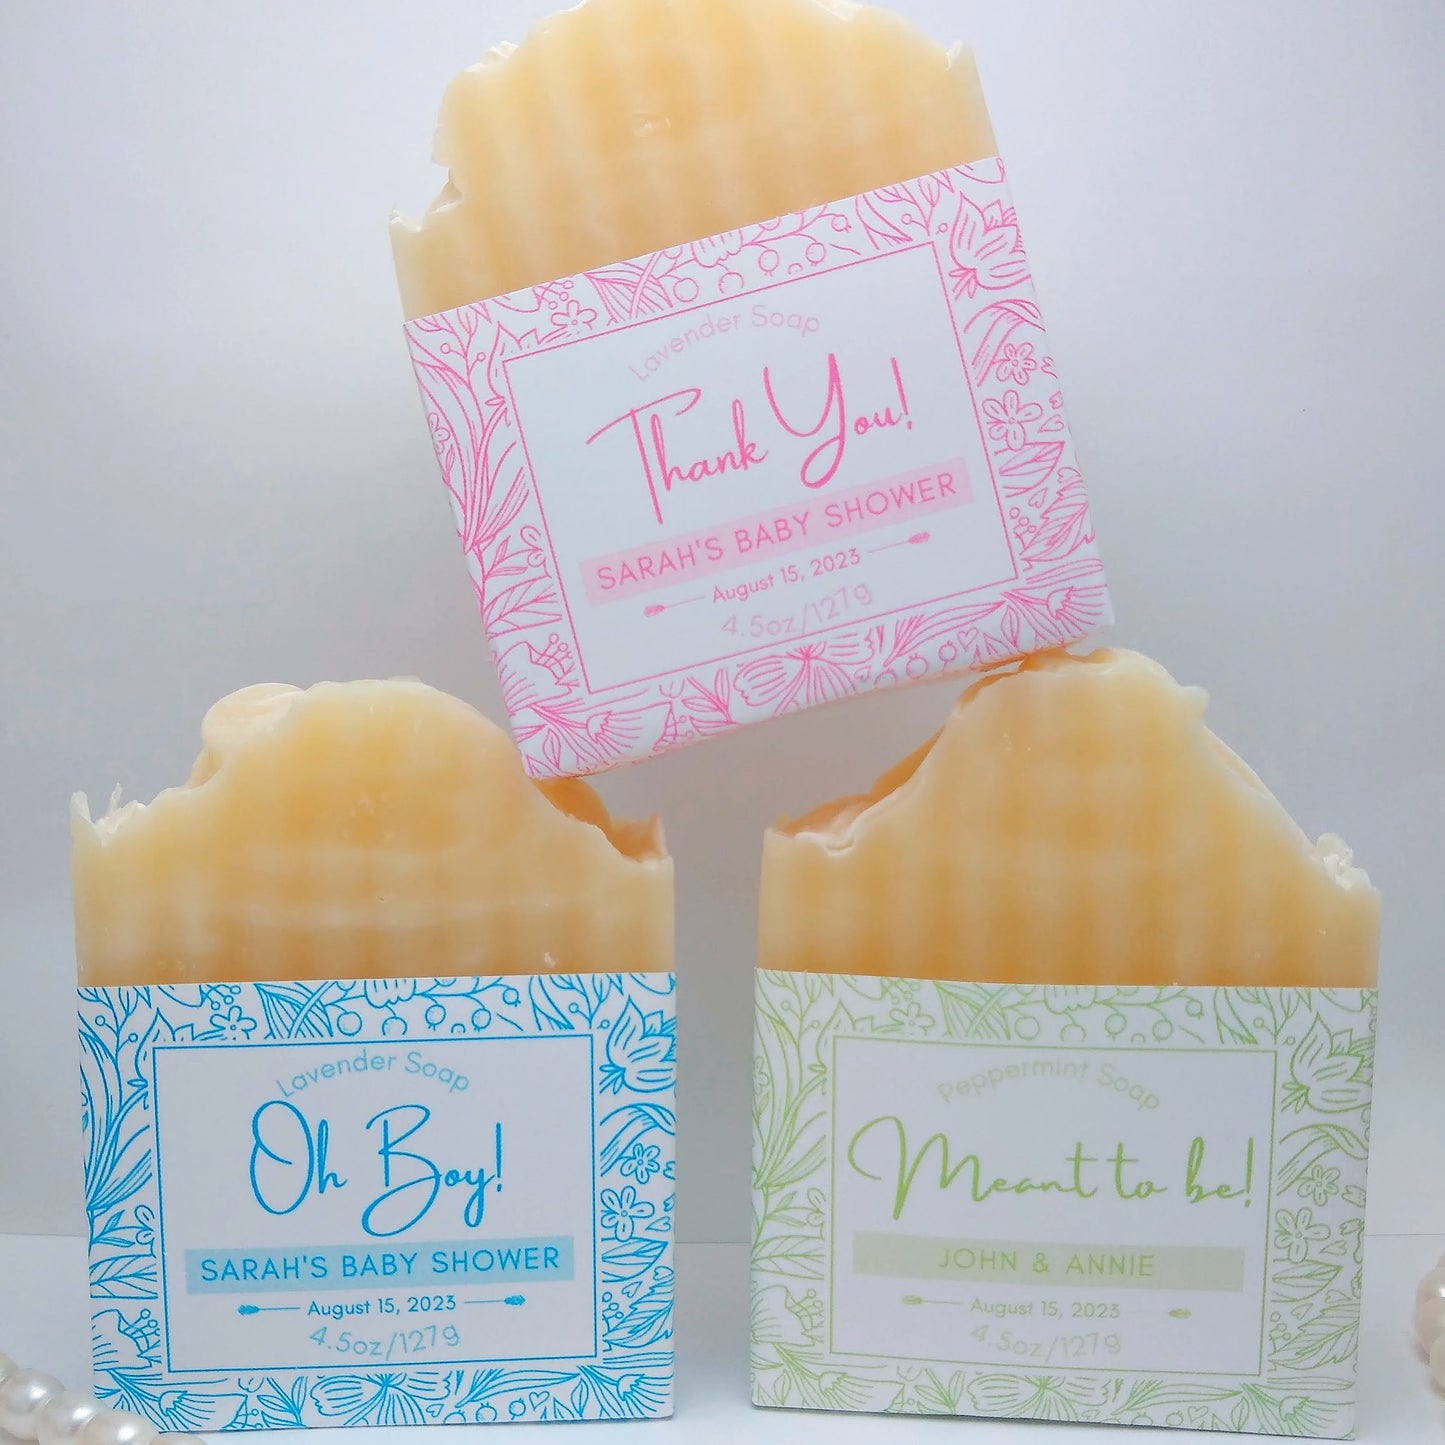 3 full bars of cream-colored soap with customized labels. One with a pink label saying "Thank you!", one with a blue label saying "Oh Boy!", and one with a light green label saying "Meant to Be". Each bar label is also printed with an event date.